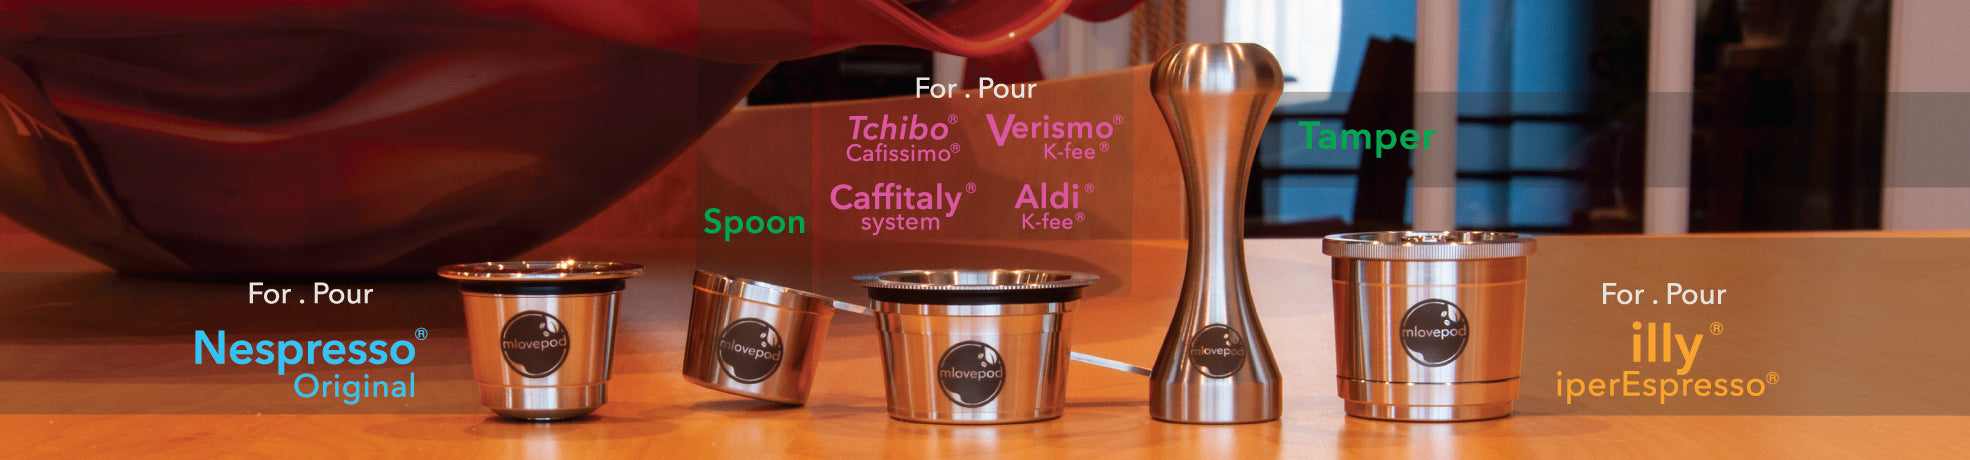 Our mlovepod products for Nespresso®, illy® Caffitaly®, Tchibo® Cafissimo®,  Verismo® & Aldi® K-fee® Machines